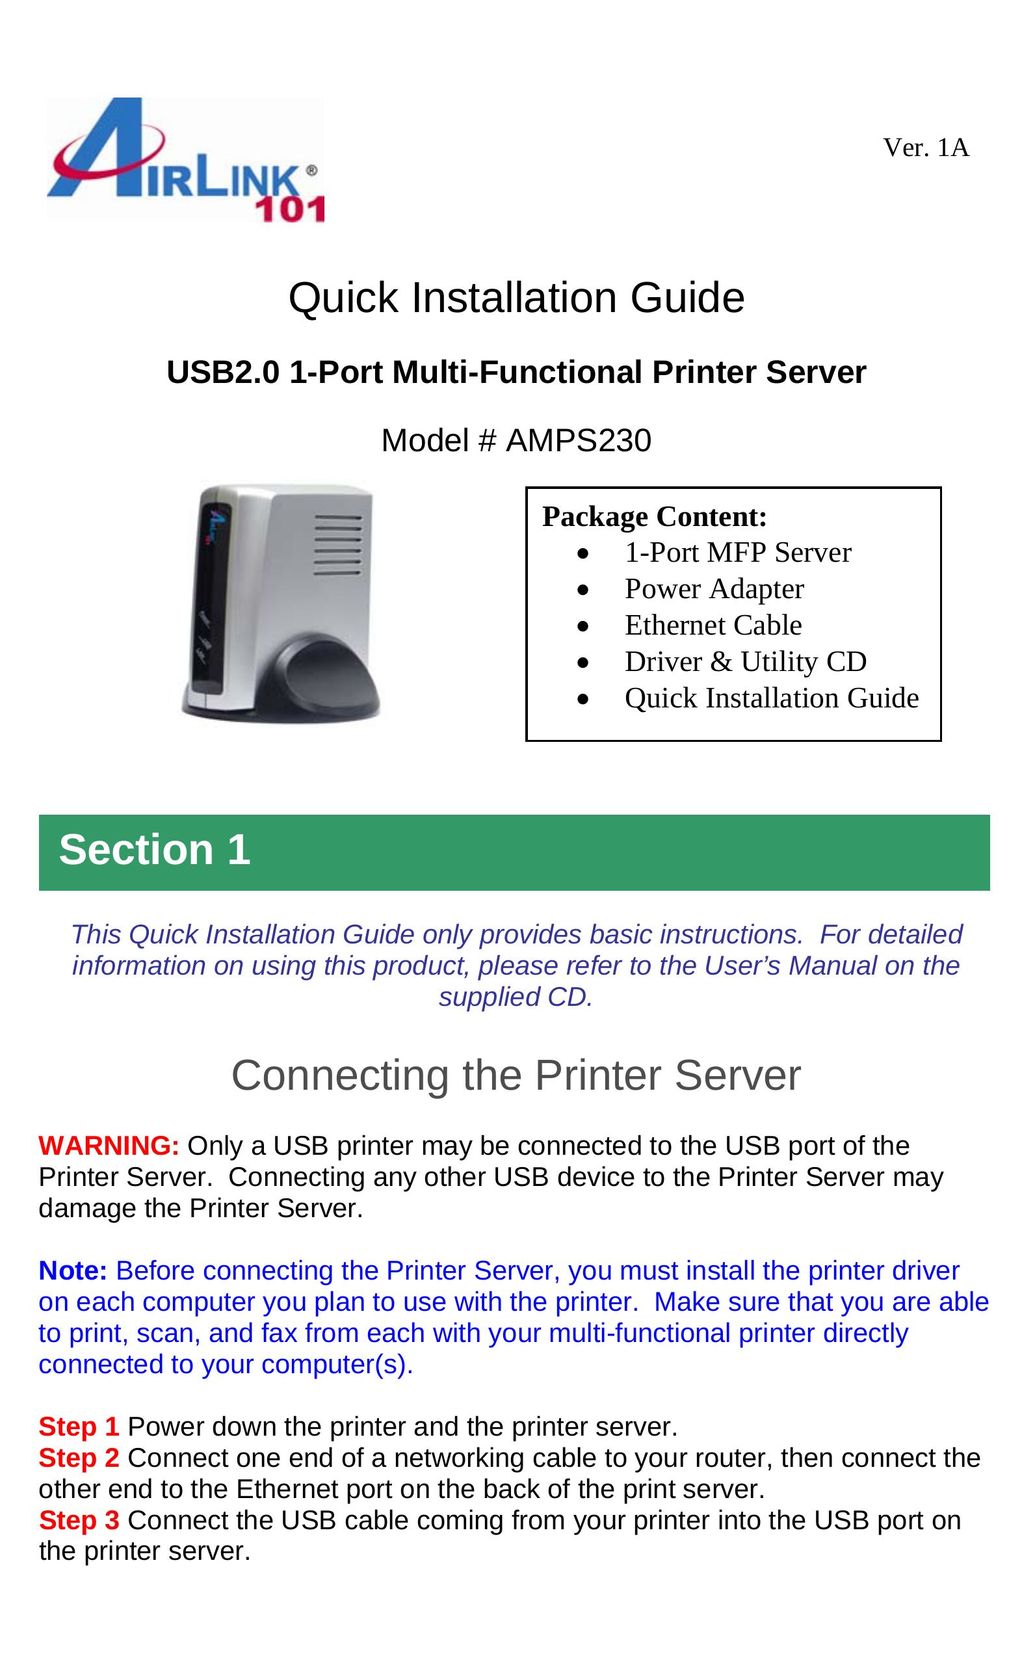 Airlink101 AMPS230 Printer User Manual (Page 1)